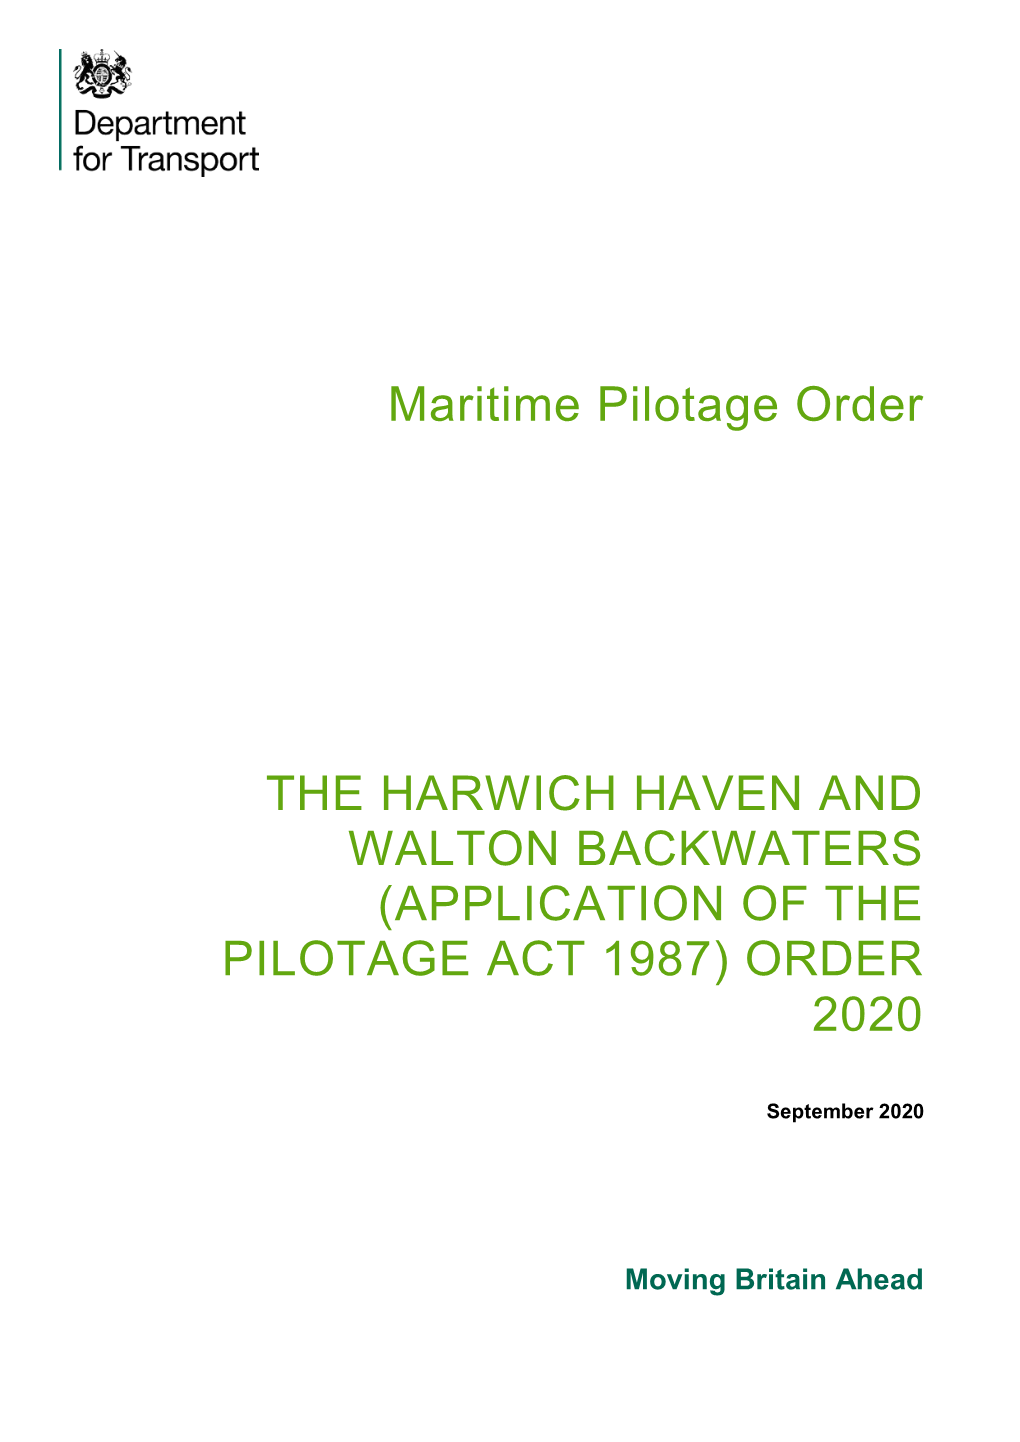 Maritime Pilotage Order: the Harwich Haven and Walton Backwaters